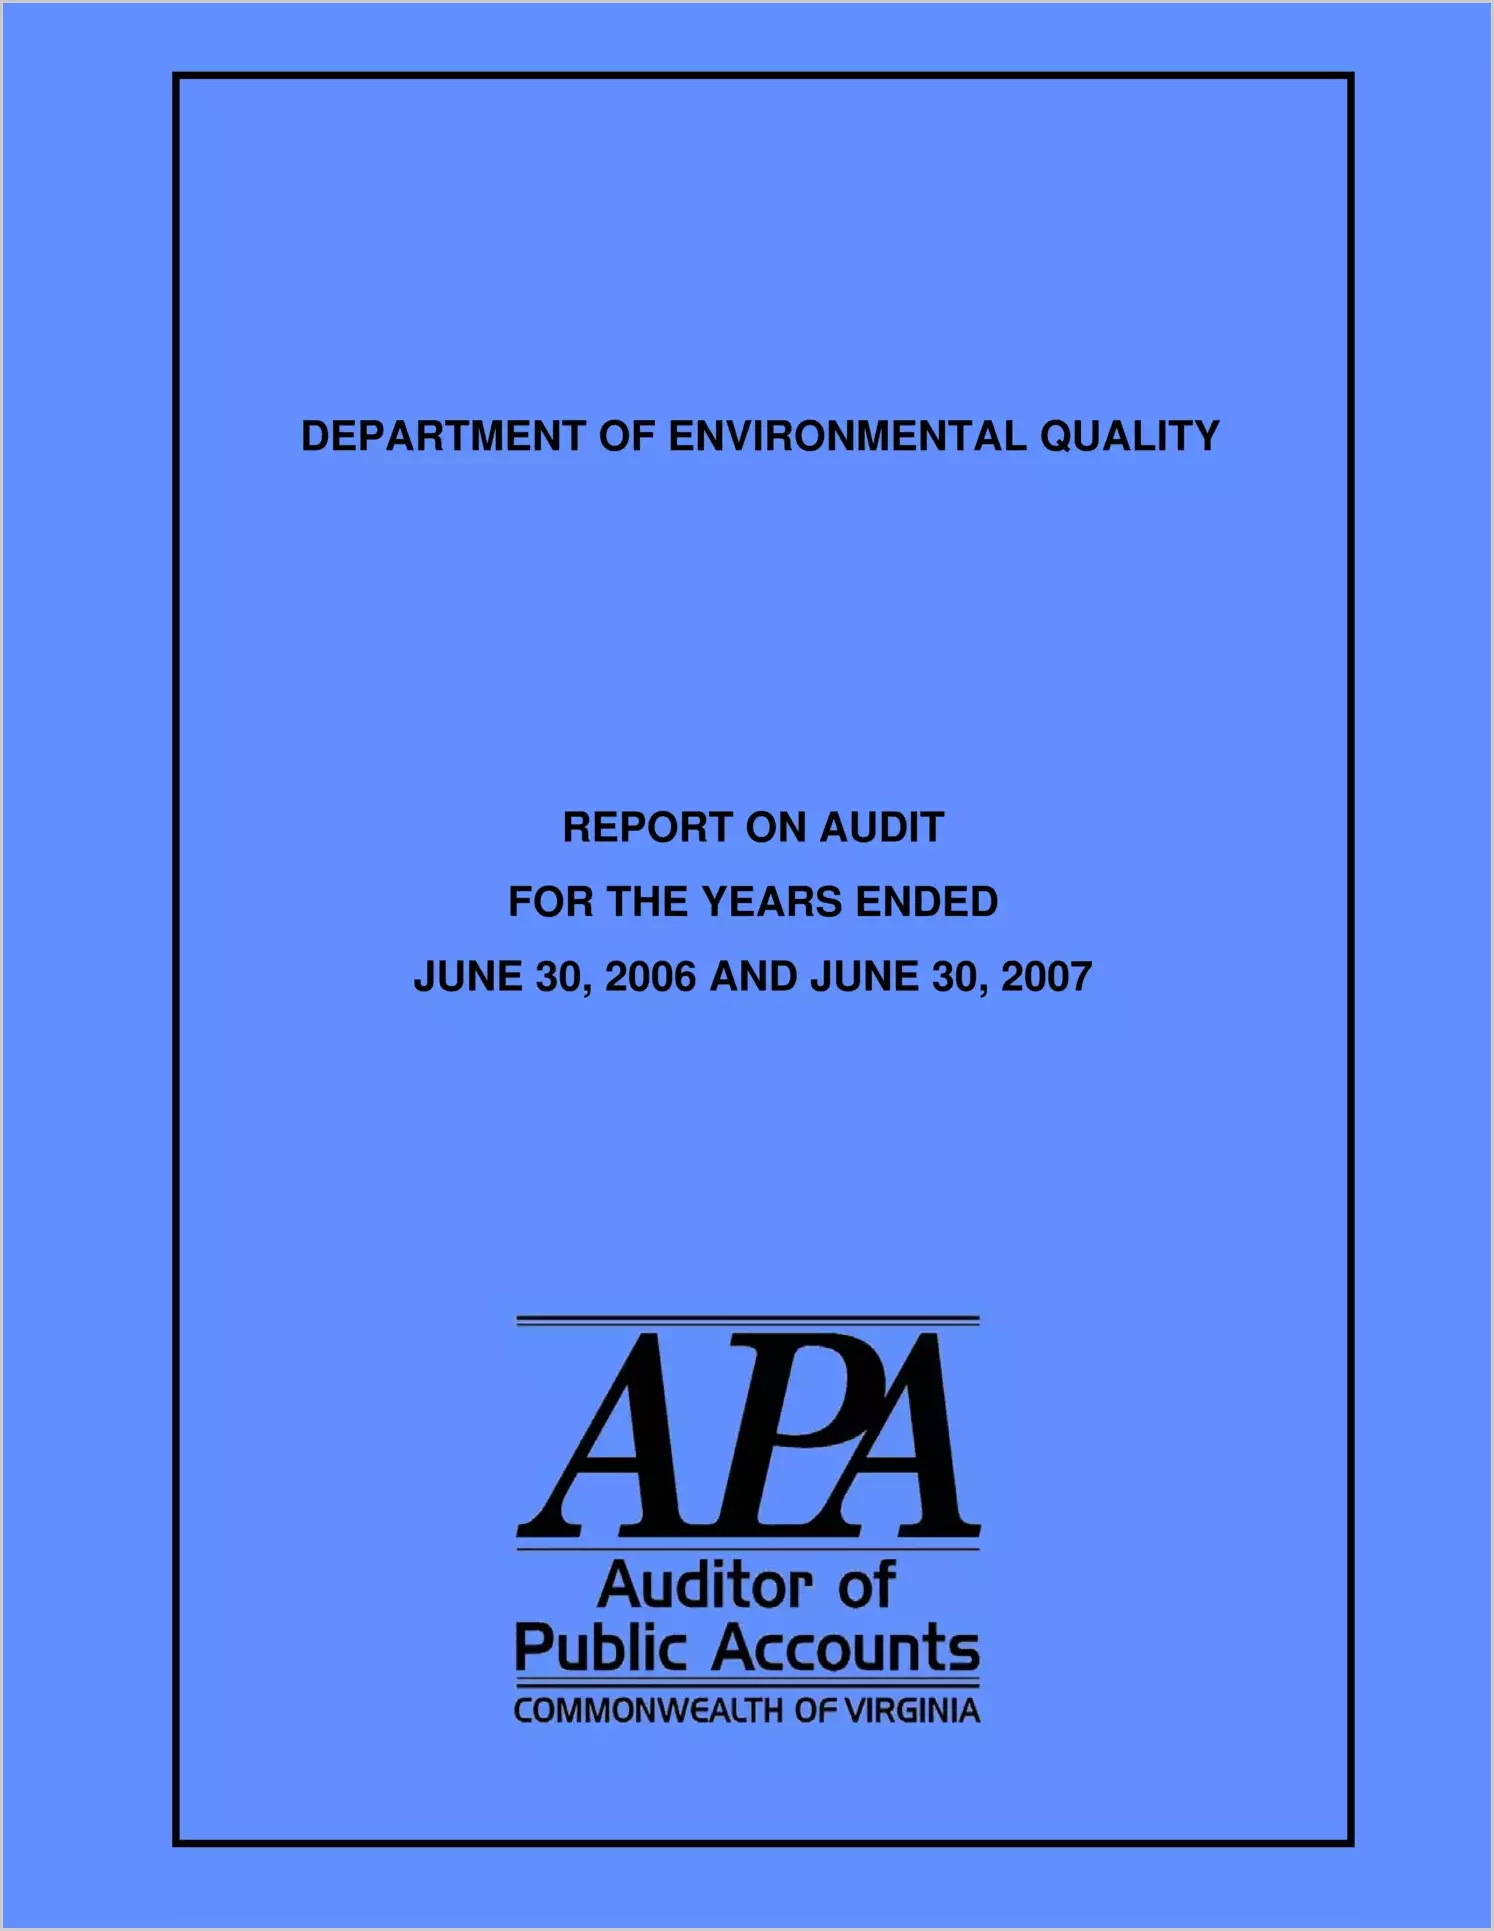 Department of Environmental Quality for the years ended June 30, 2006 and June 30, 2007